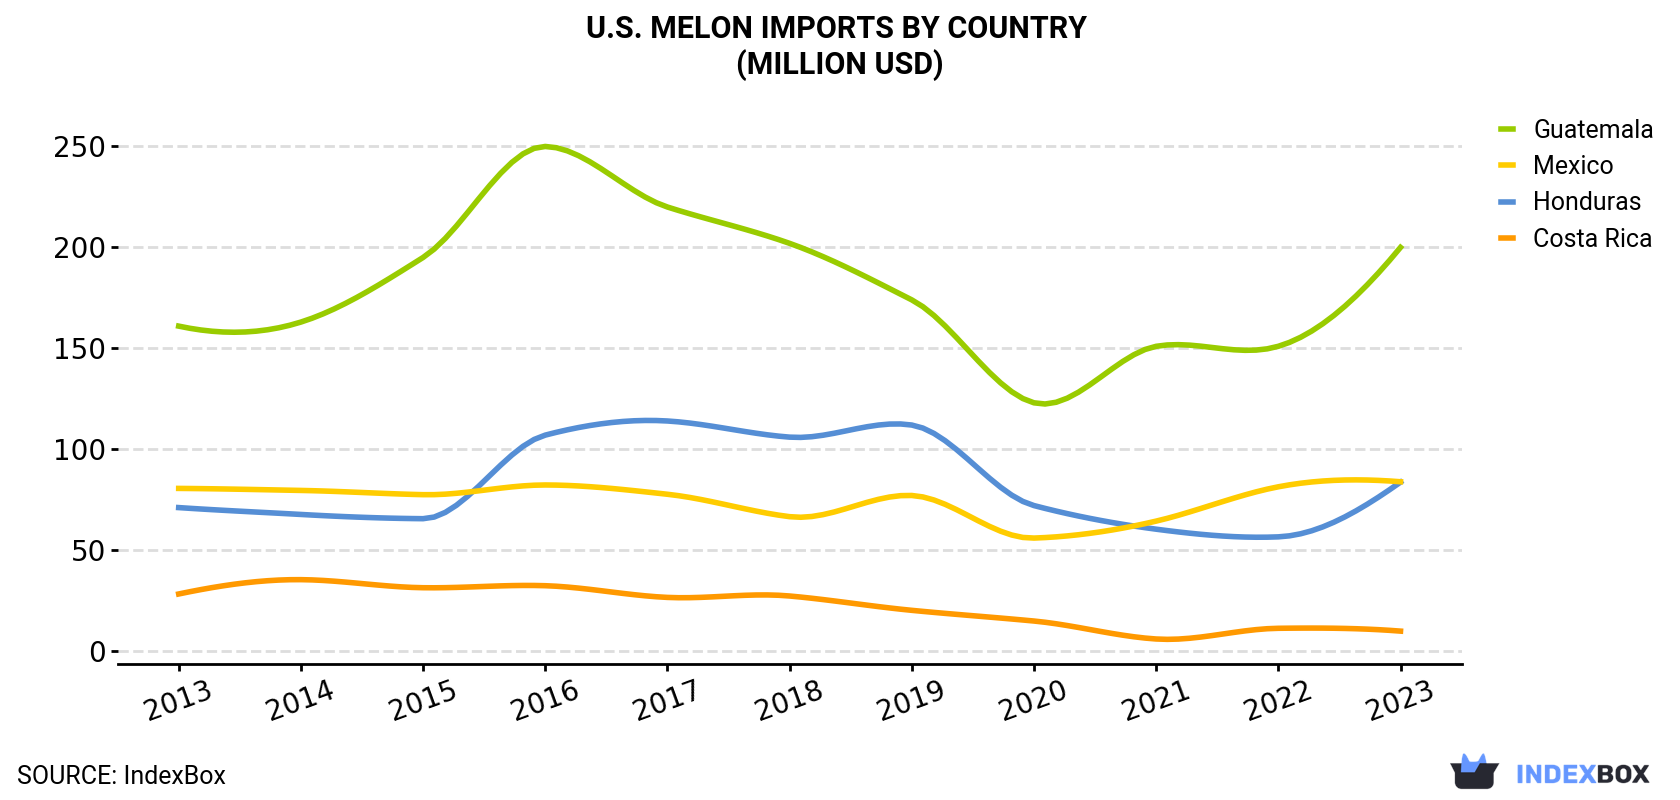 U.S. Melon Imports By Country (Million USD)